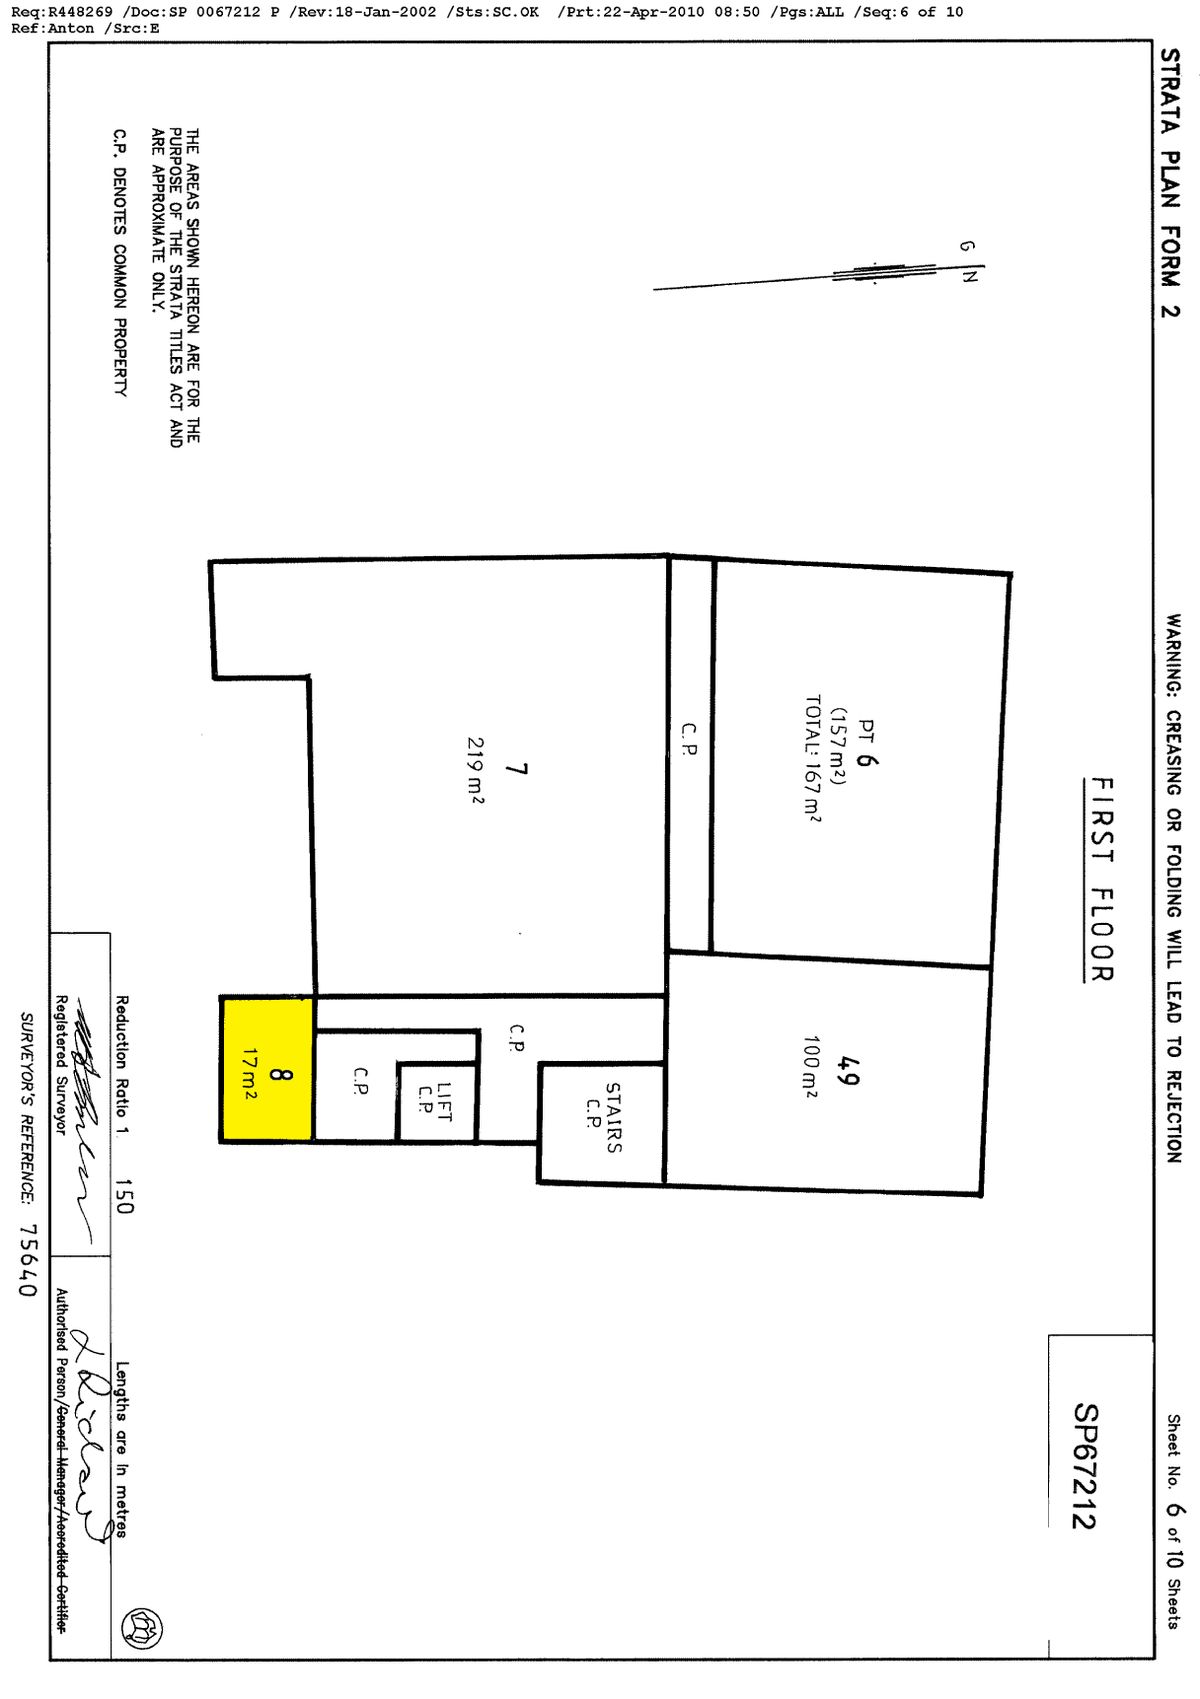 147 King St   Floor plan 6 page 0001